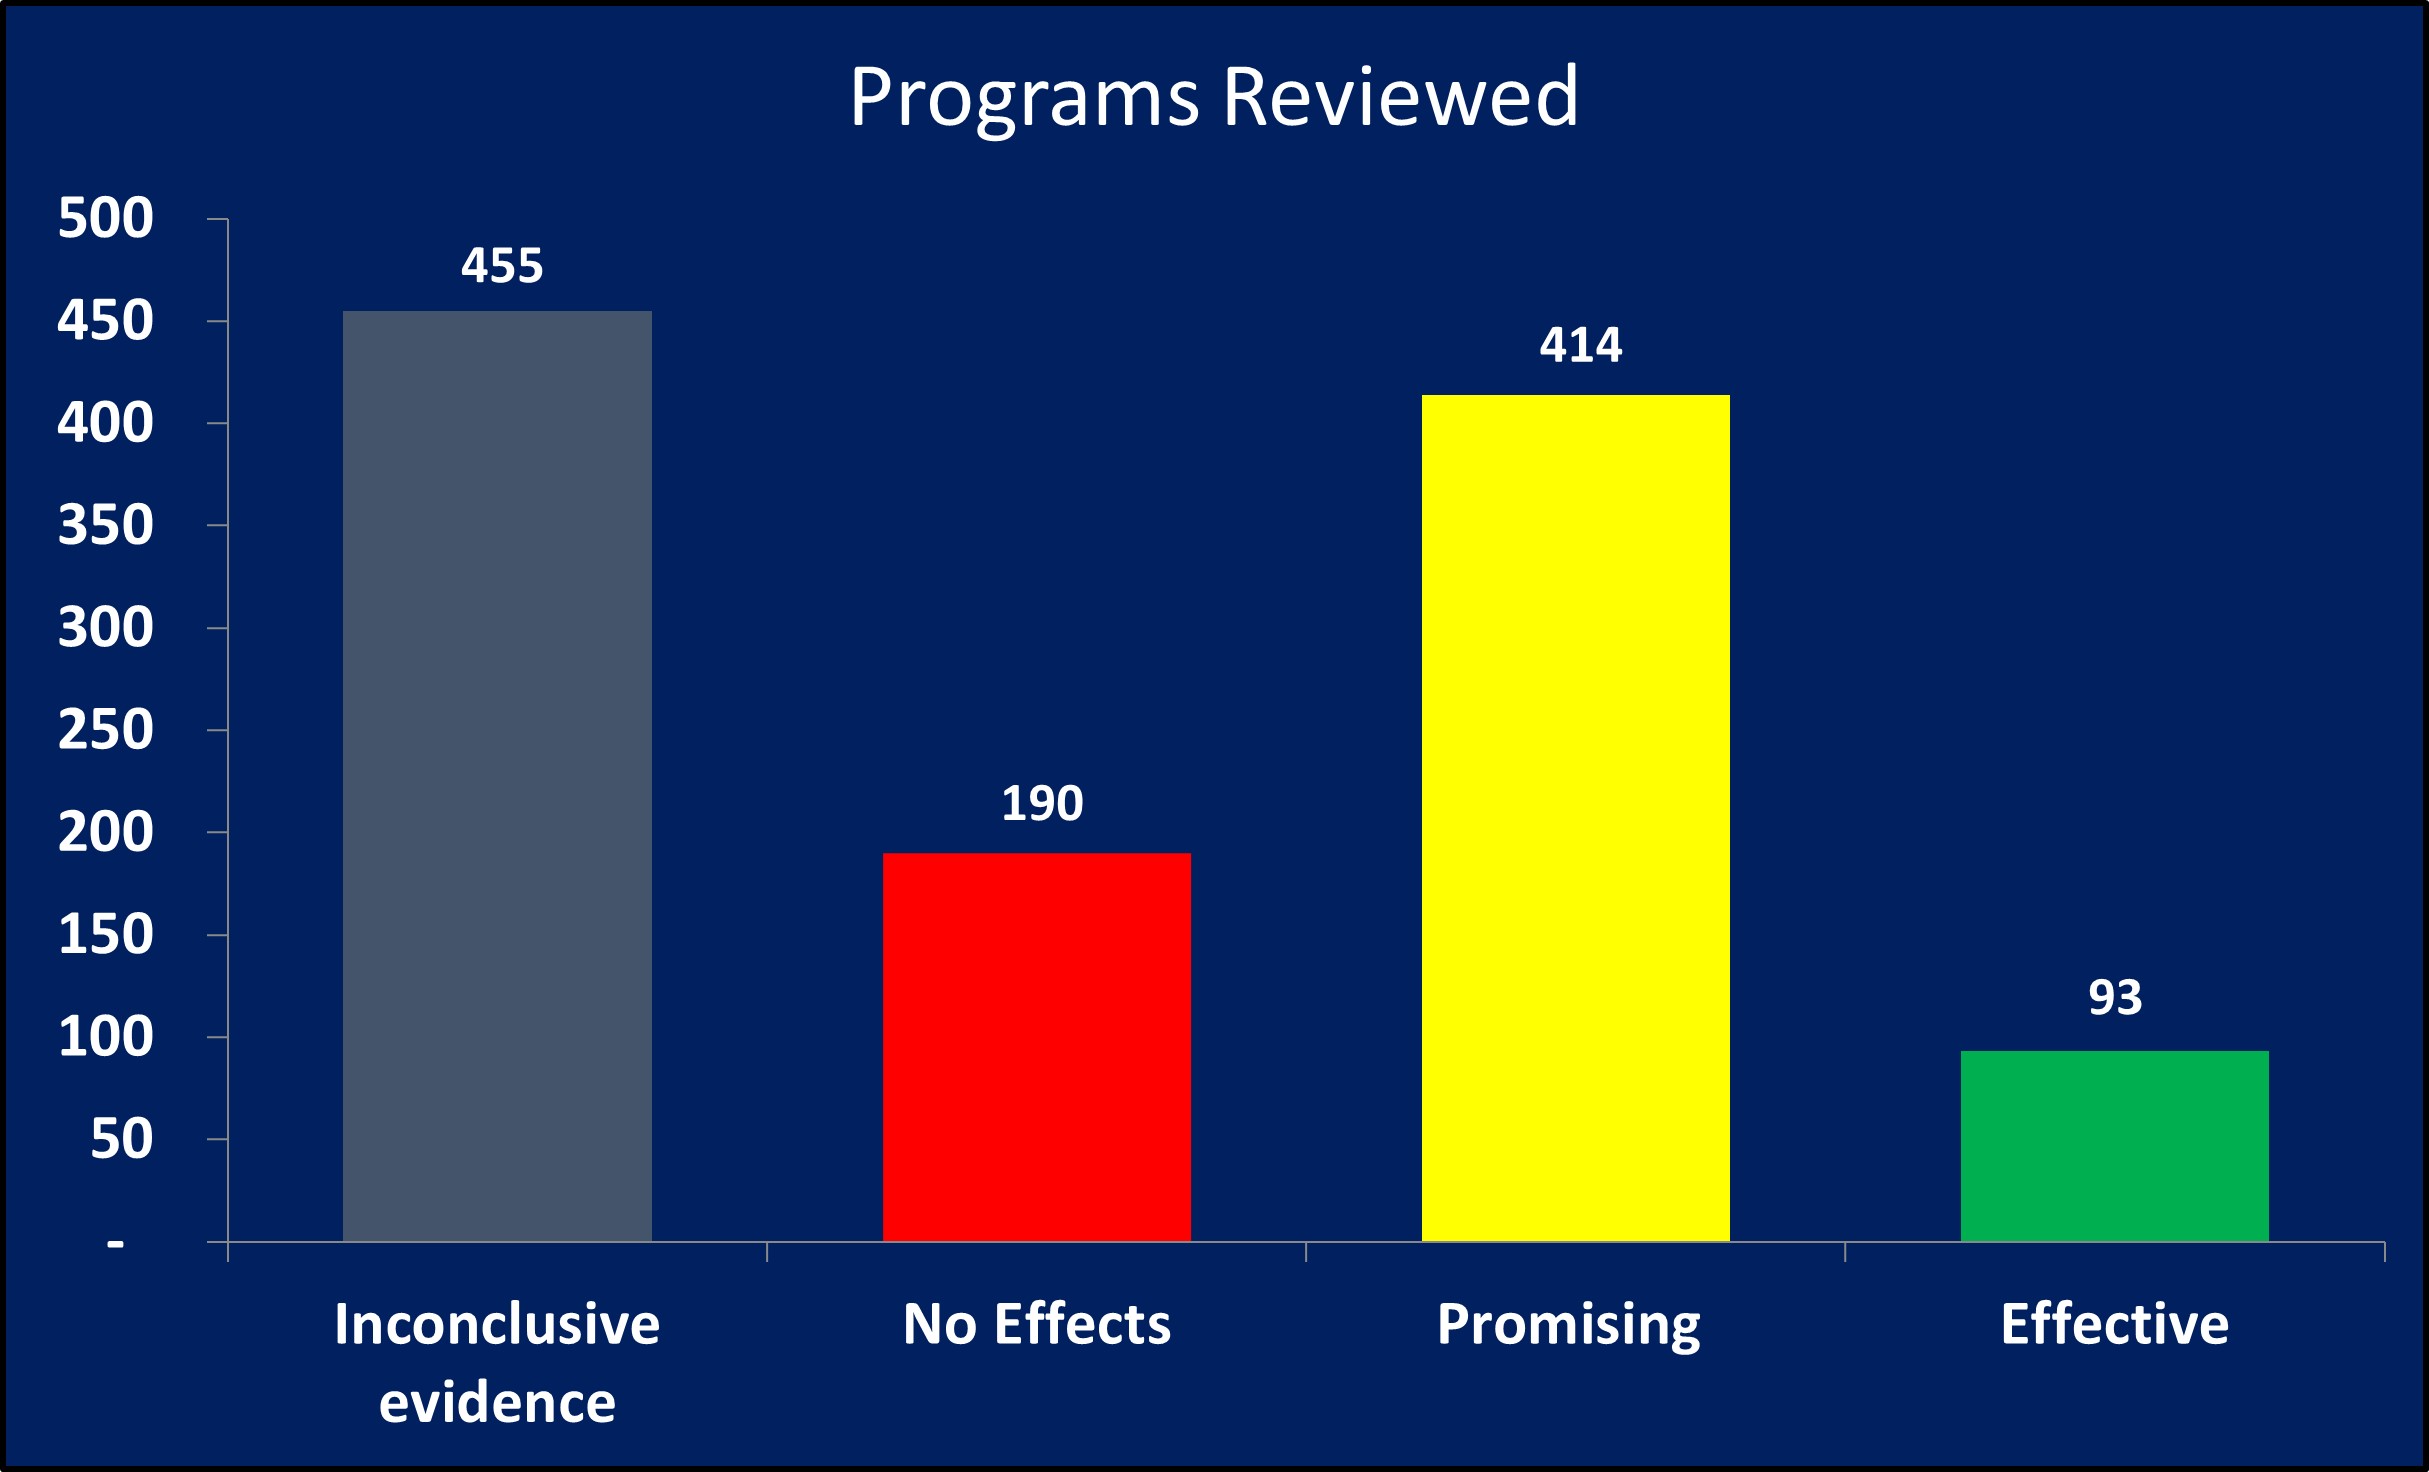 Results of program reviews: 434 inconclusive evidence, no effects 174, promising 376, effective 92